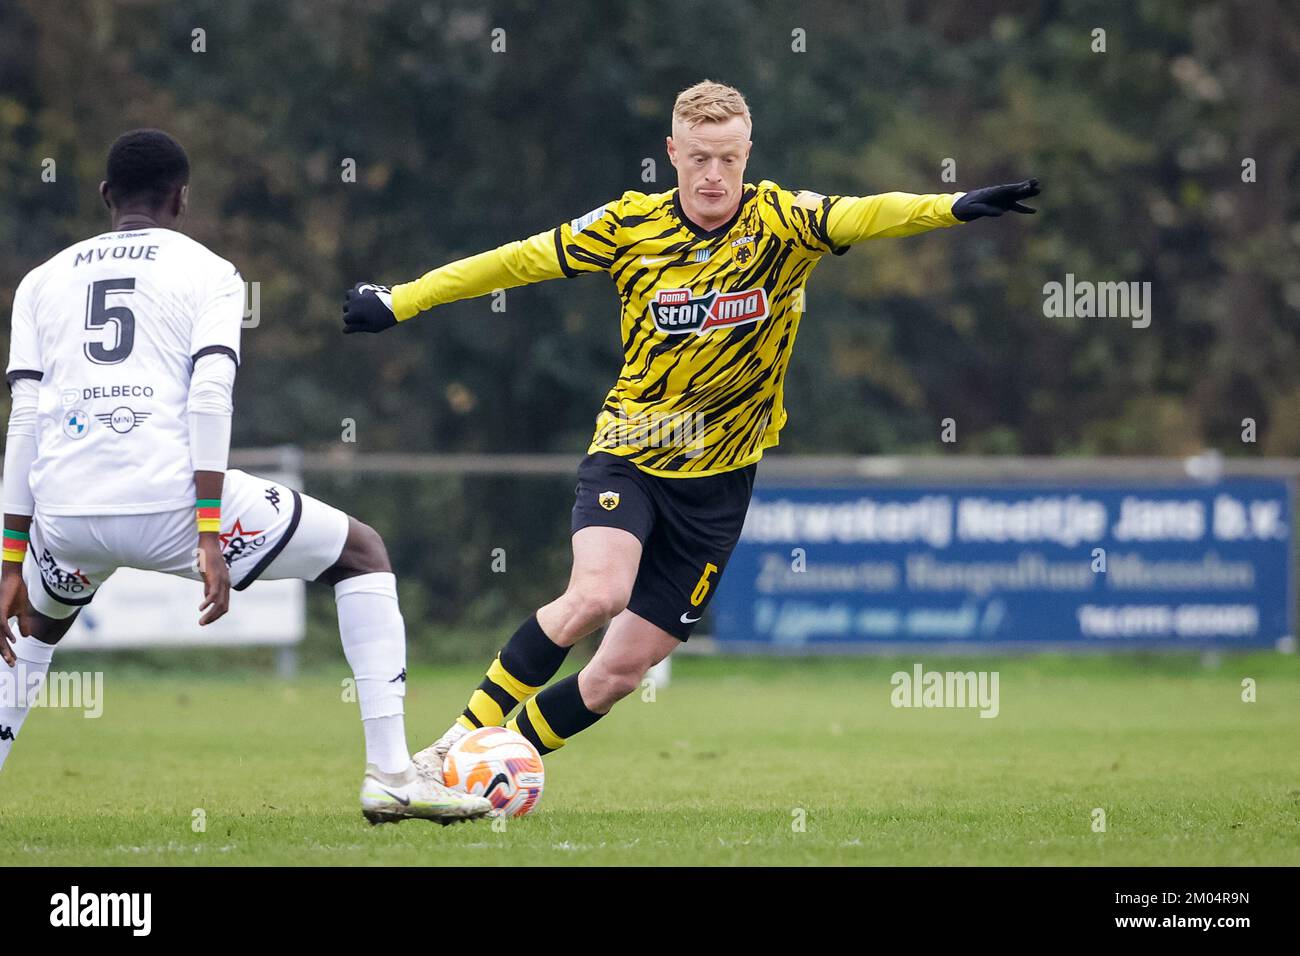 BURGH-HAAMSTEDE, NETHERLANDS - DECEMBER 4: Jens Jonsson of AEK Athens dribbles with the ball during the Friendly match between AEK Athens and RFC Seraing at Sportpark van Zuijen on December 4, 2022 in Burgh-Haamstede, Netherlands (Photo by Broer van den Boom/Orange Pictures) Stock Photo